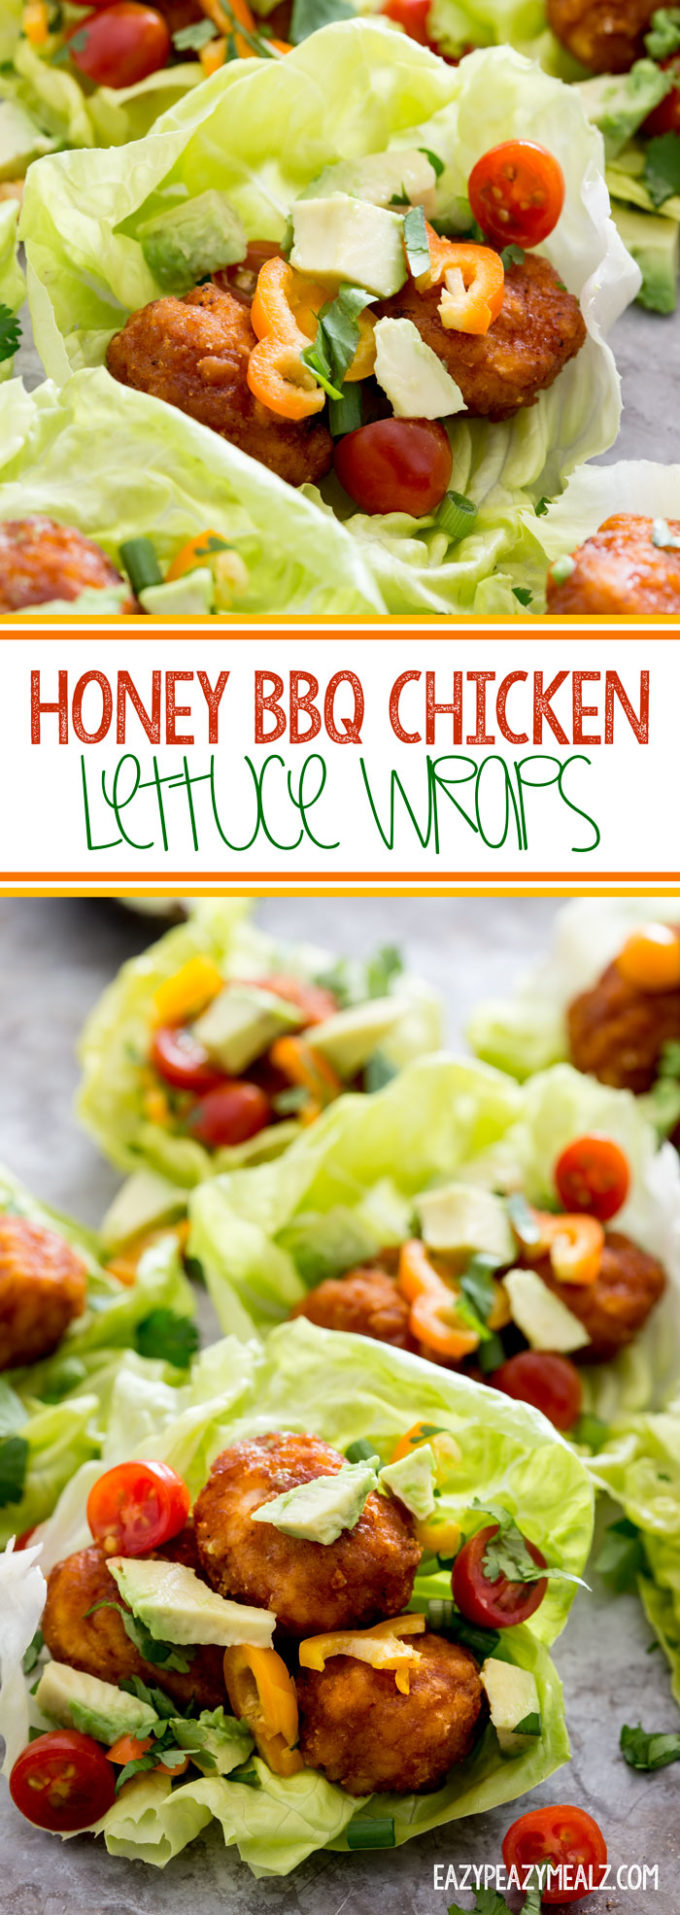 Honey BBQ chicken lettuce wraps are easy to make and super flavorful